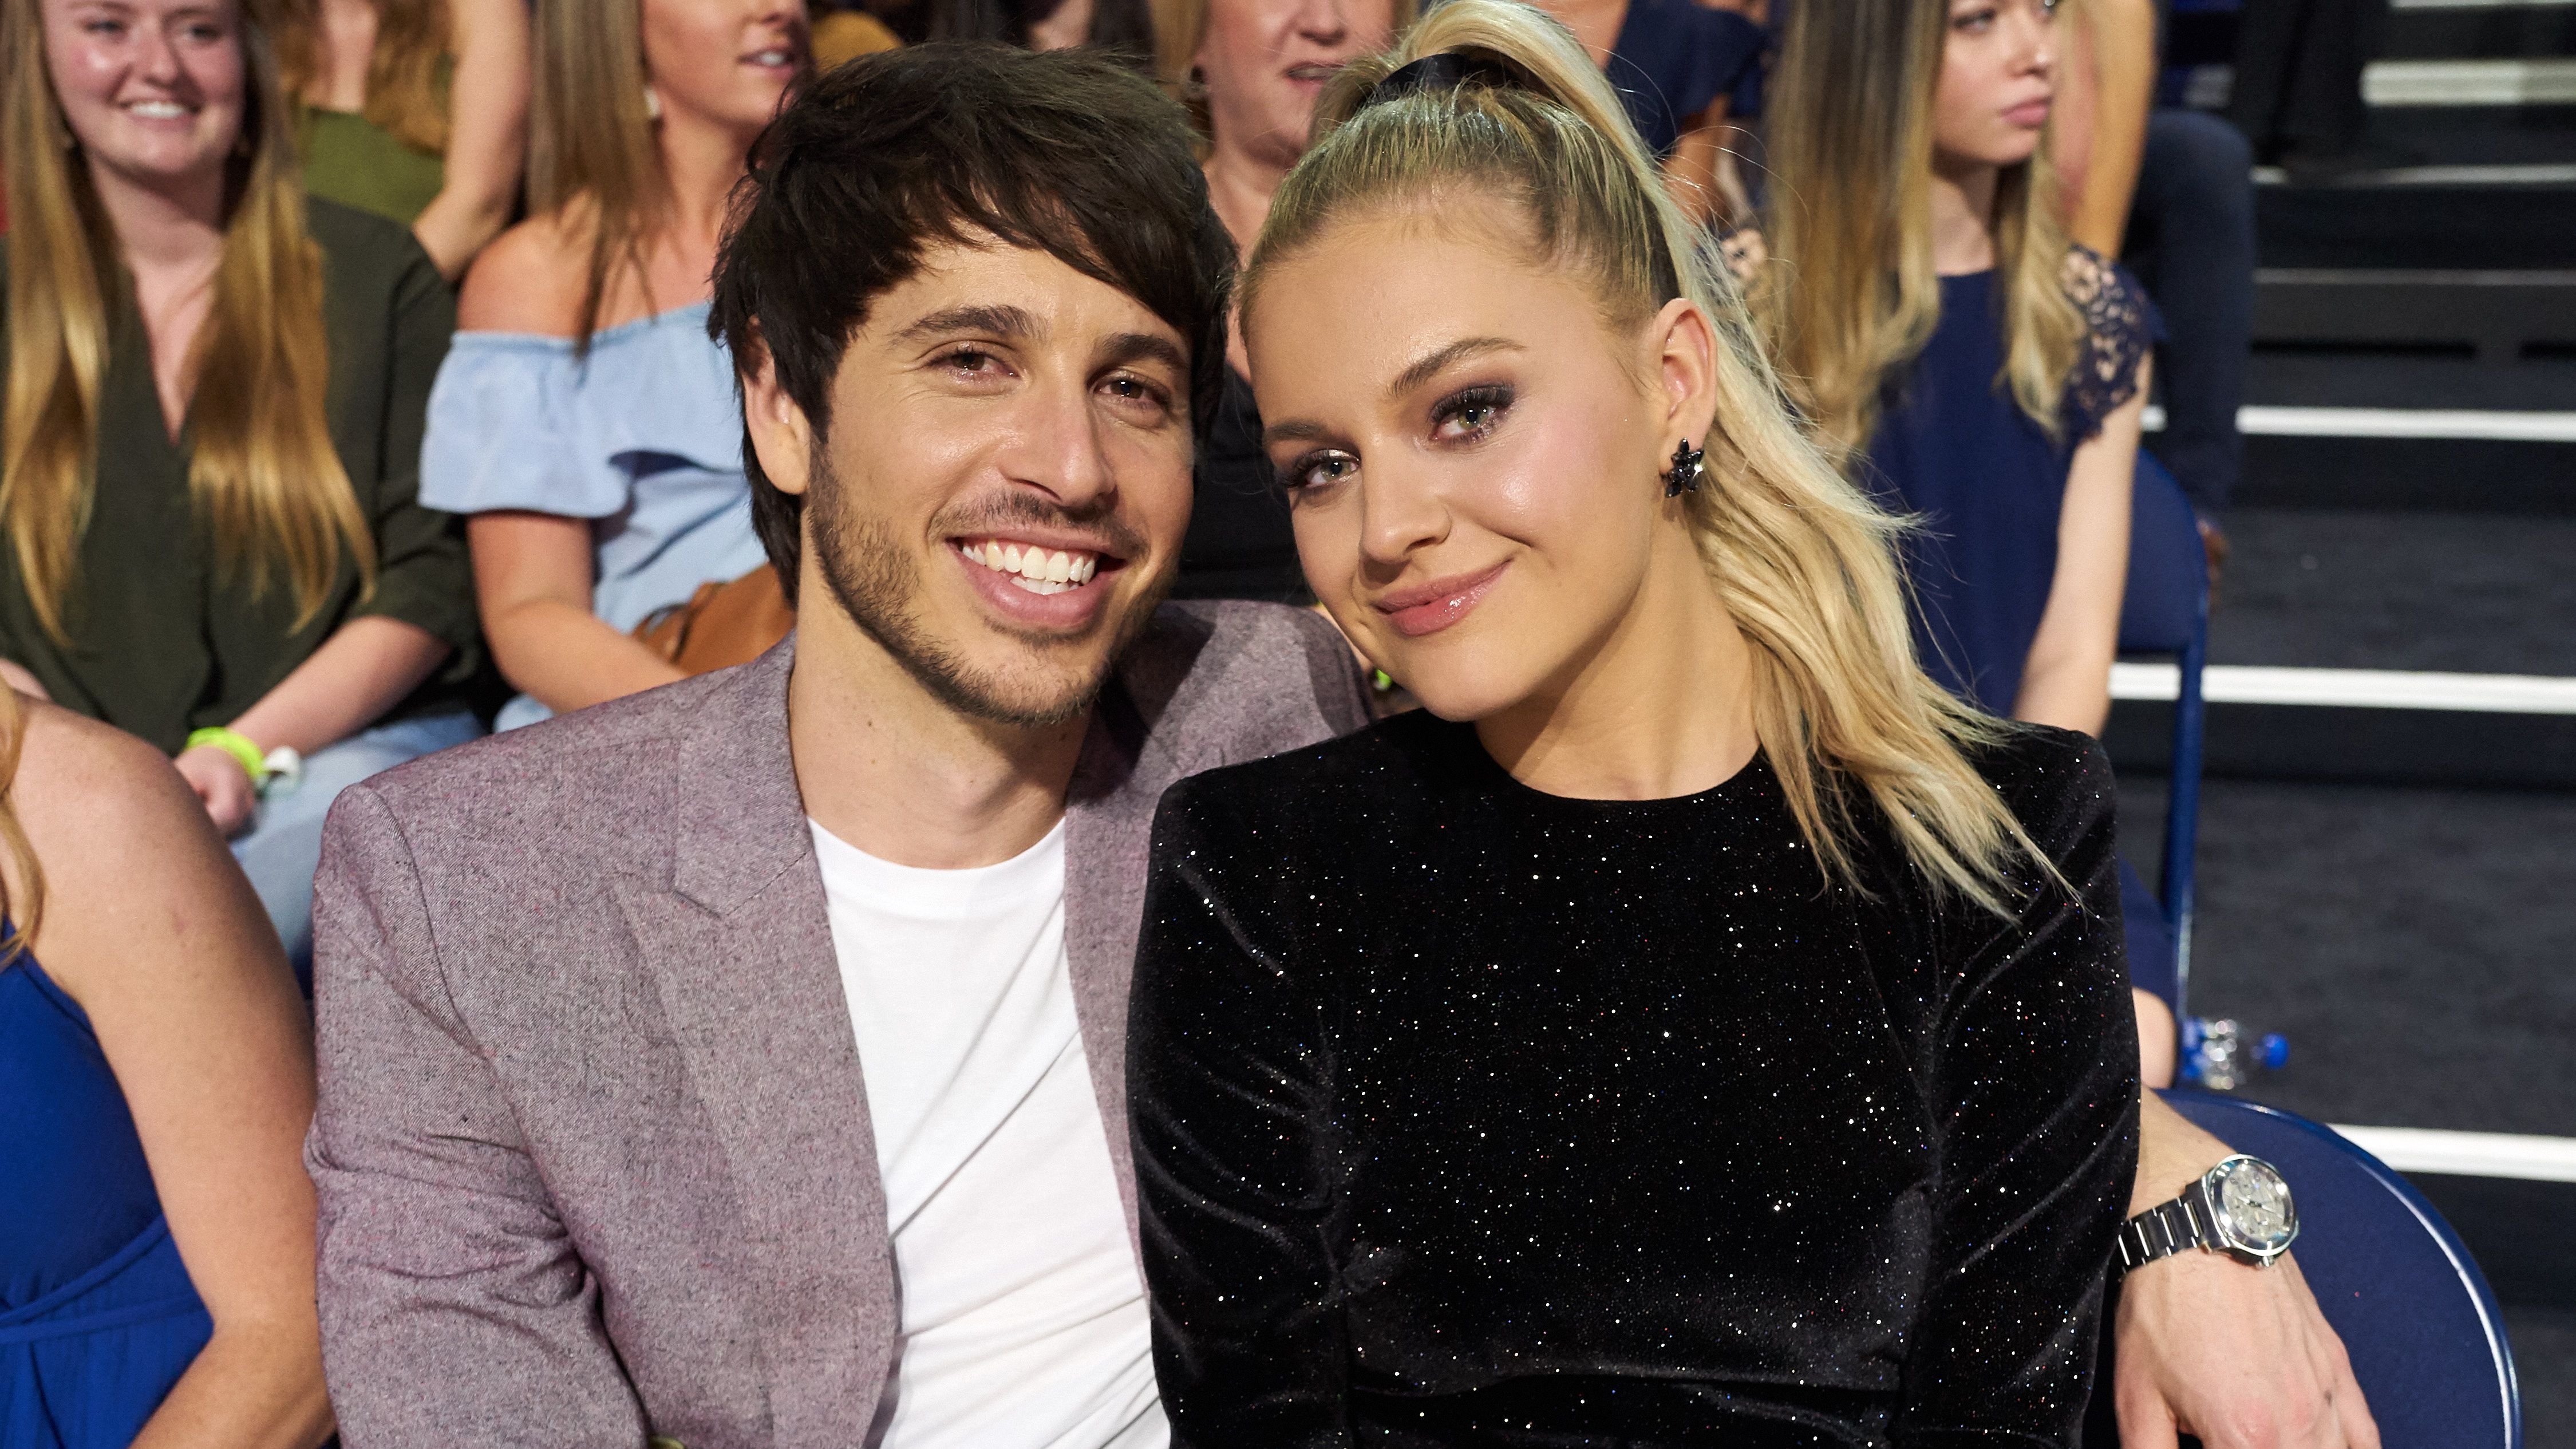 https://hips.hearstapps.com/hmg-prod/images/morgan-evans-and-kelsea-ballerini-attend-the-2019-cmt-music-news-photo-1661858077.jpg?crop=1xw:0.84375xh;center,top